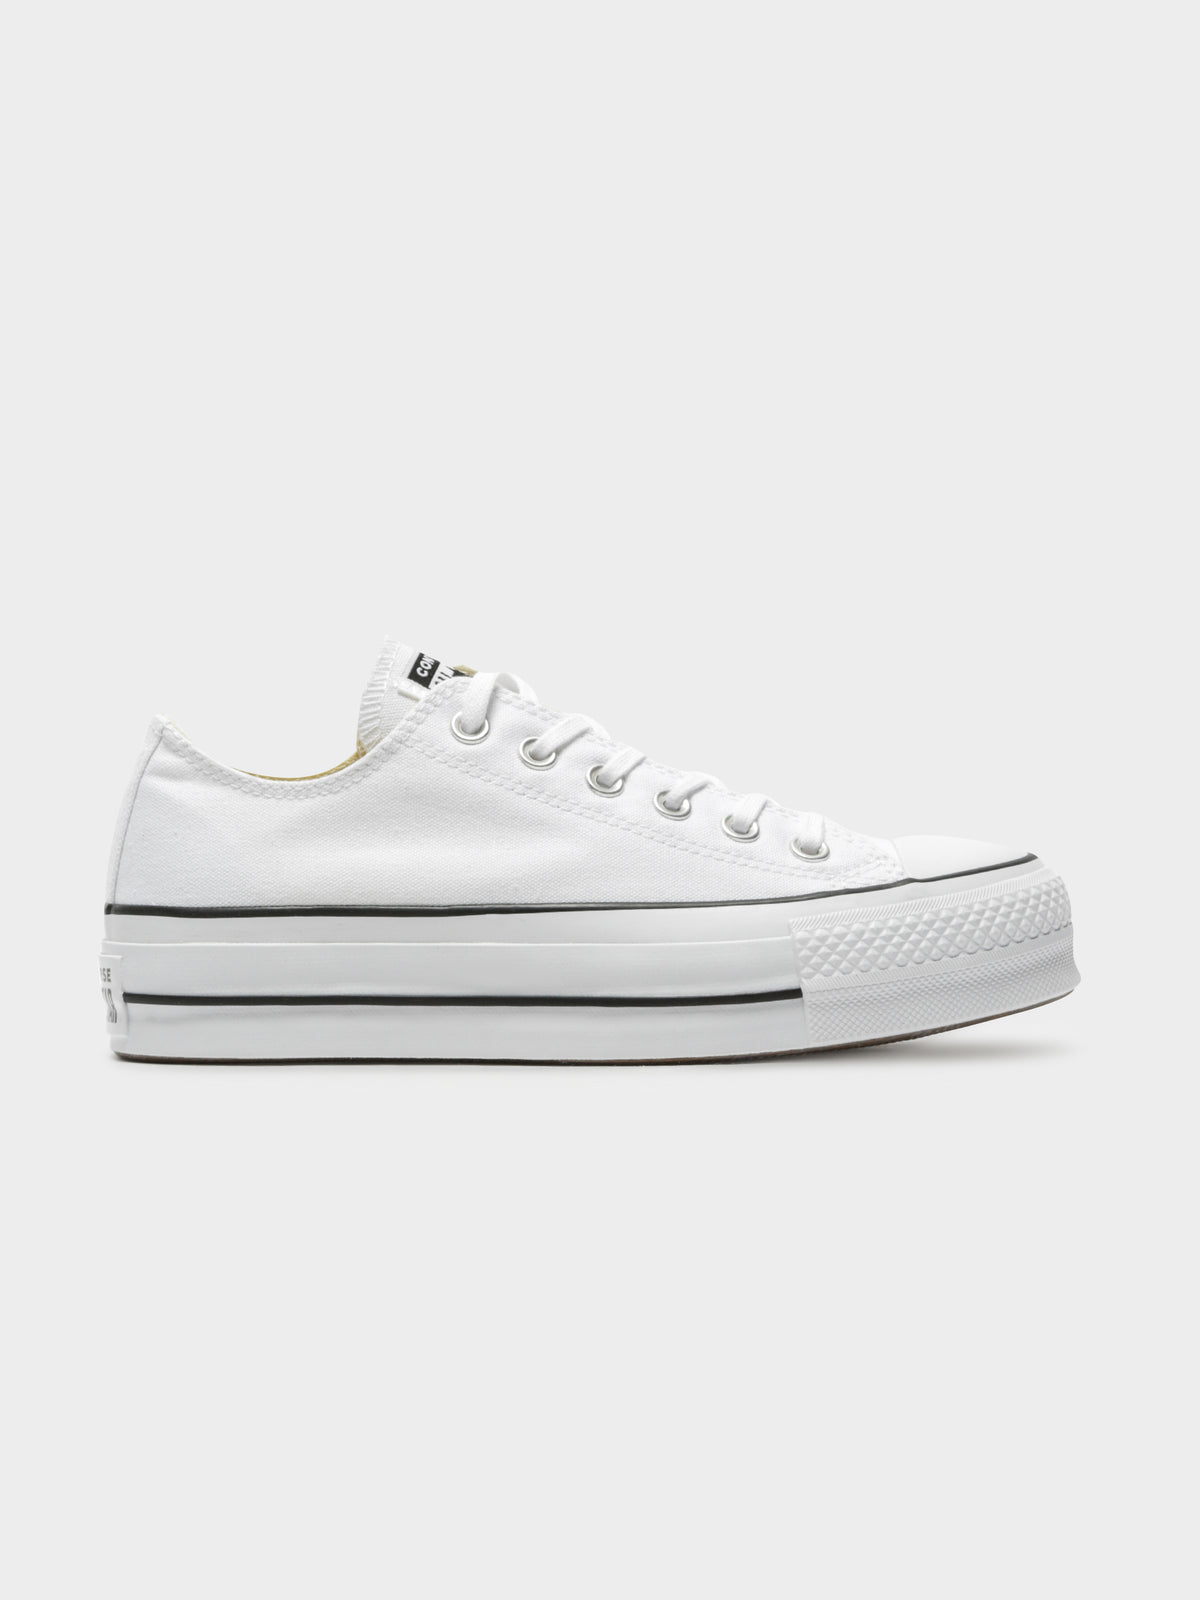 Unisex Chuck Taylor Lift Low Top Sneakers in White